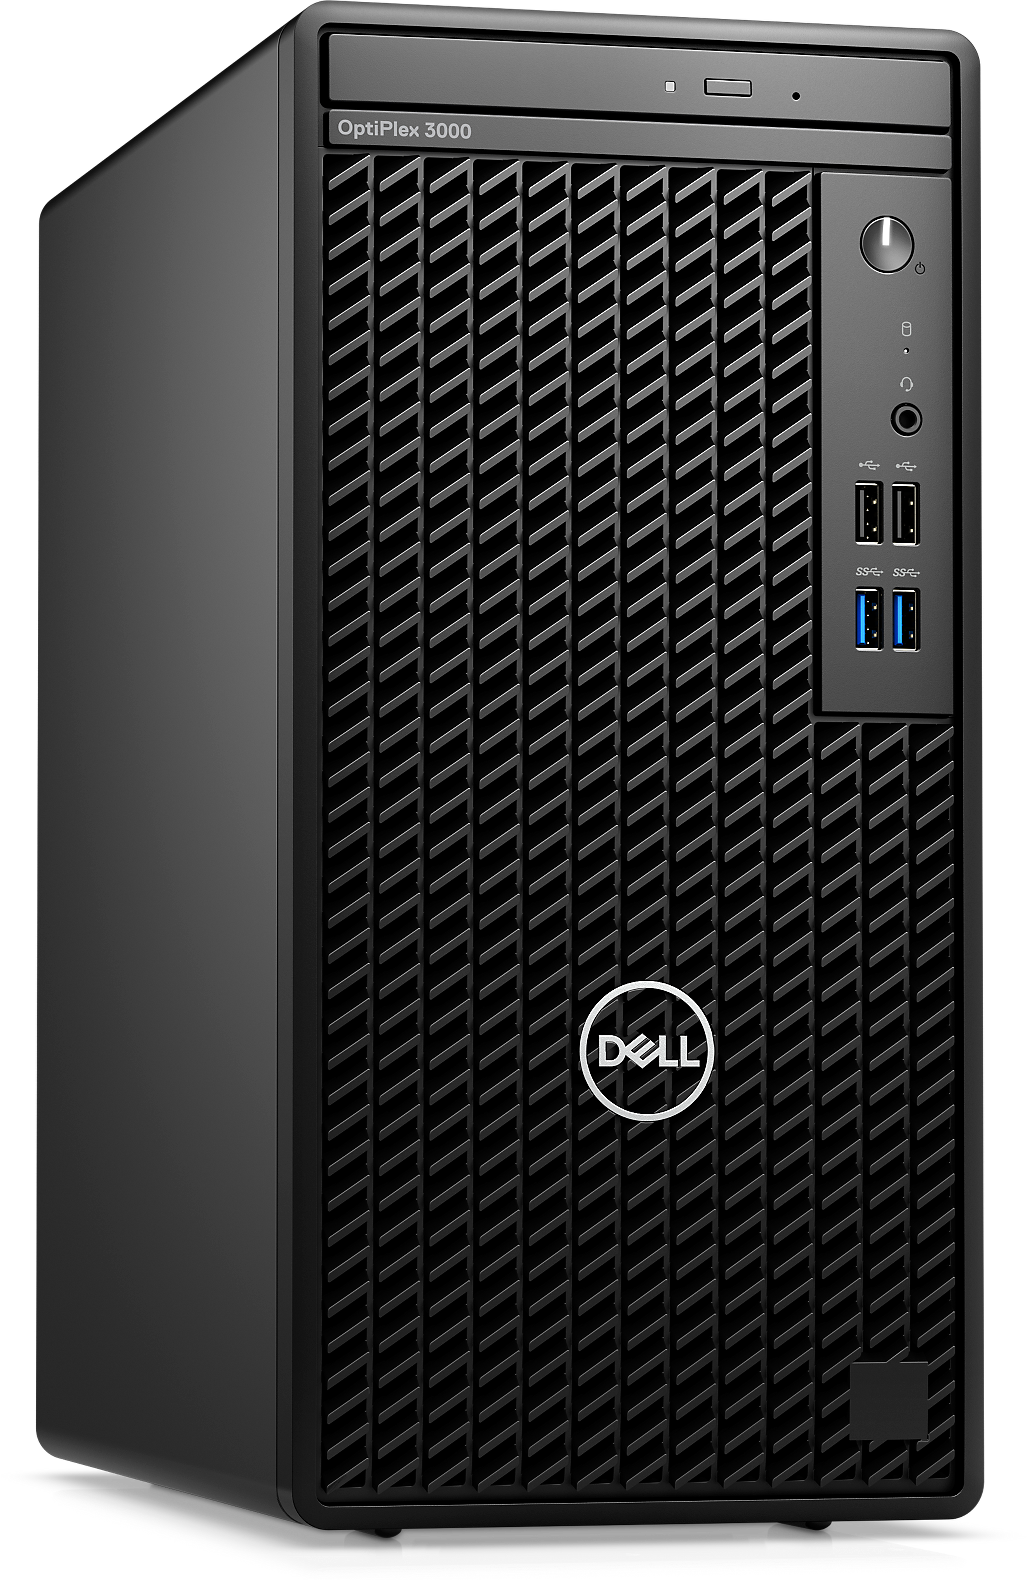 https://i.dell.com/is/image/DellContent/content/dam/ss2/products/desktops-and-all-in-ones/optiplex/3000-tsff/media-gallery/optiplex-3000t-gallery-4.psd?wid=1920&hei=1580&fmt=png-alpha&qlt=90%2c0&op_usm=1.75%2c0.3%2c2%2c0&resMode=sharp&pscan=auto&fit=constrain%2c1&align=0%2c0